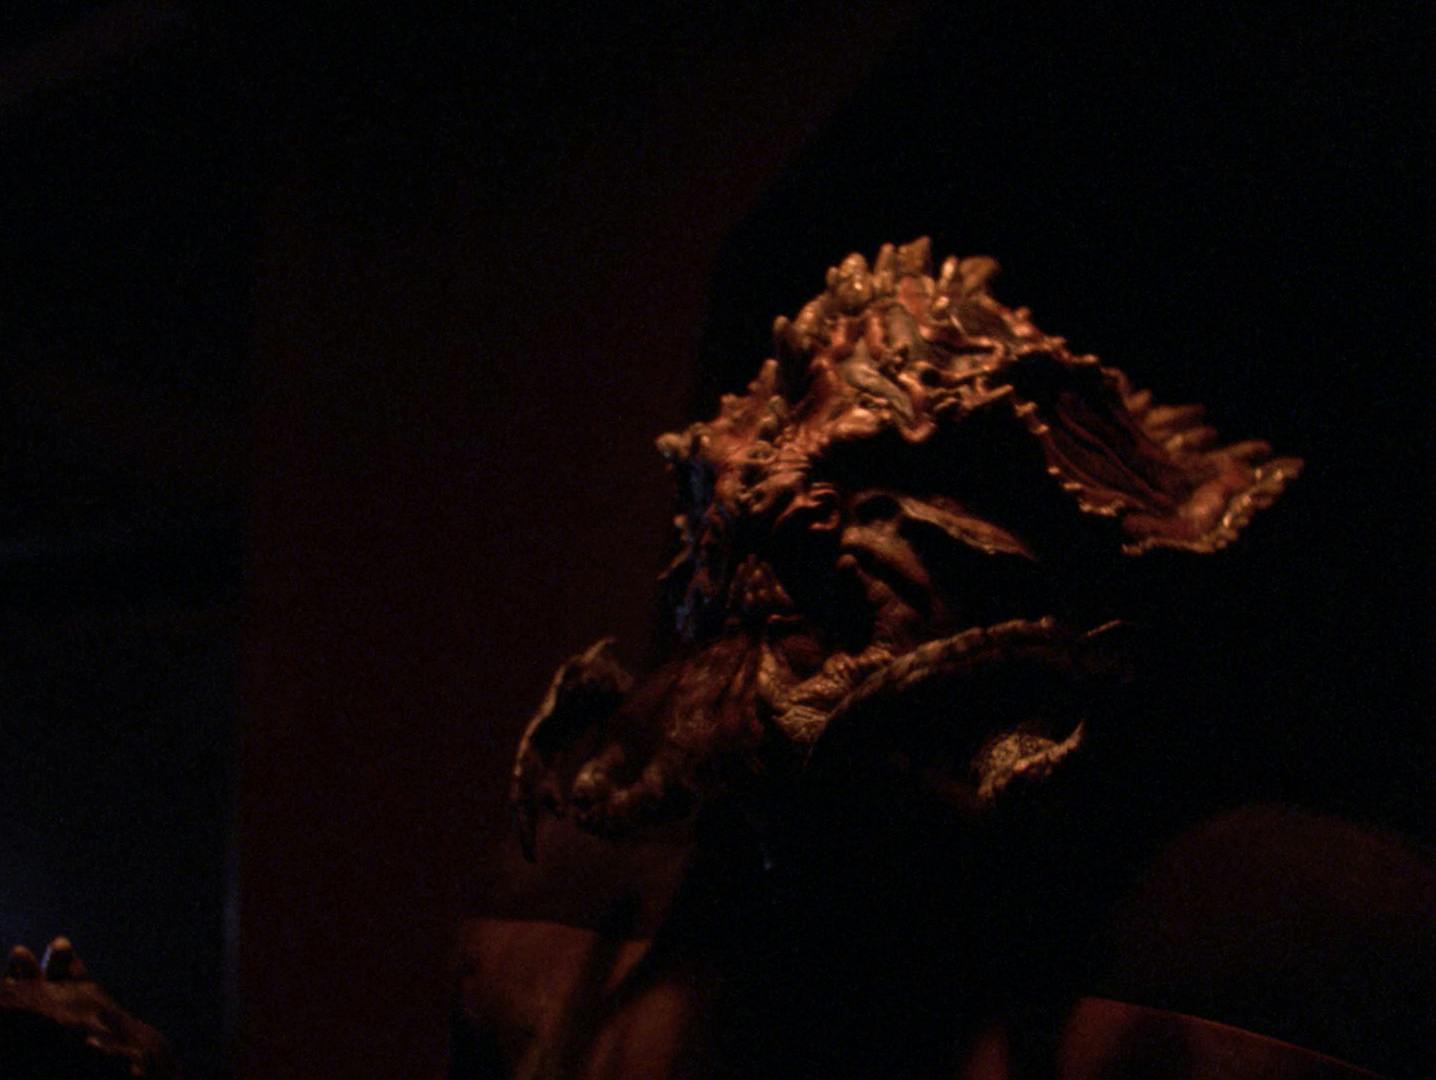 Worf devolves into a grotesque creature in 'Genesis'